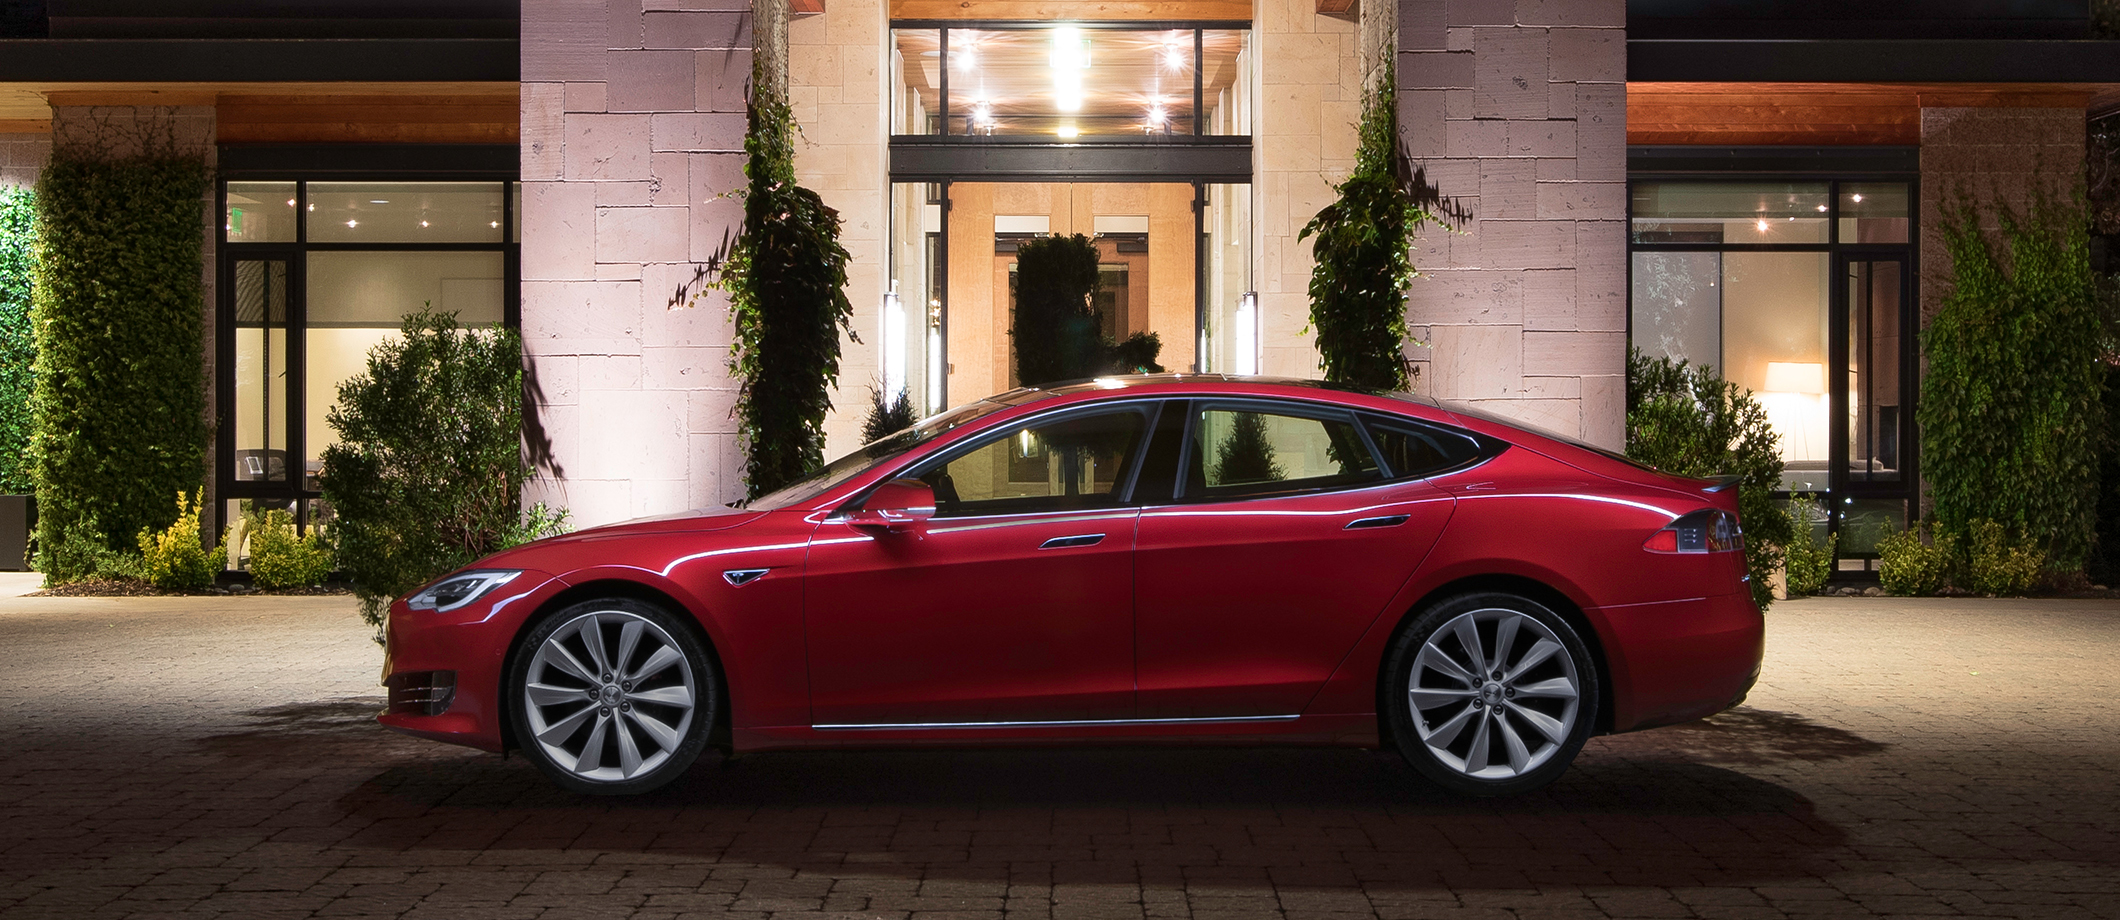 Tesla's least expensive vehicle is now the Model S 75 at $69,500 after price & newly included options [Updated] - Electrek